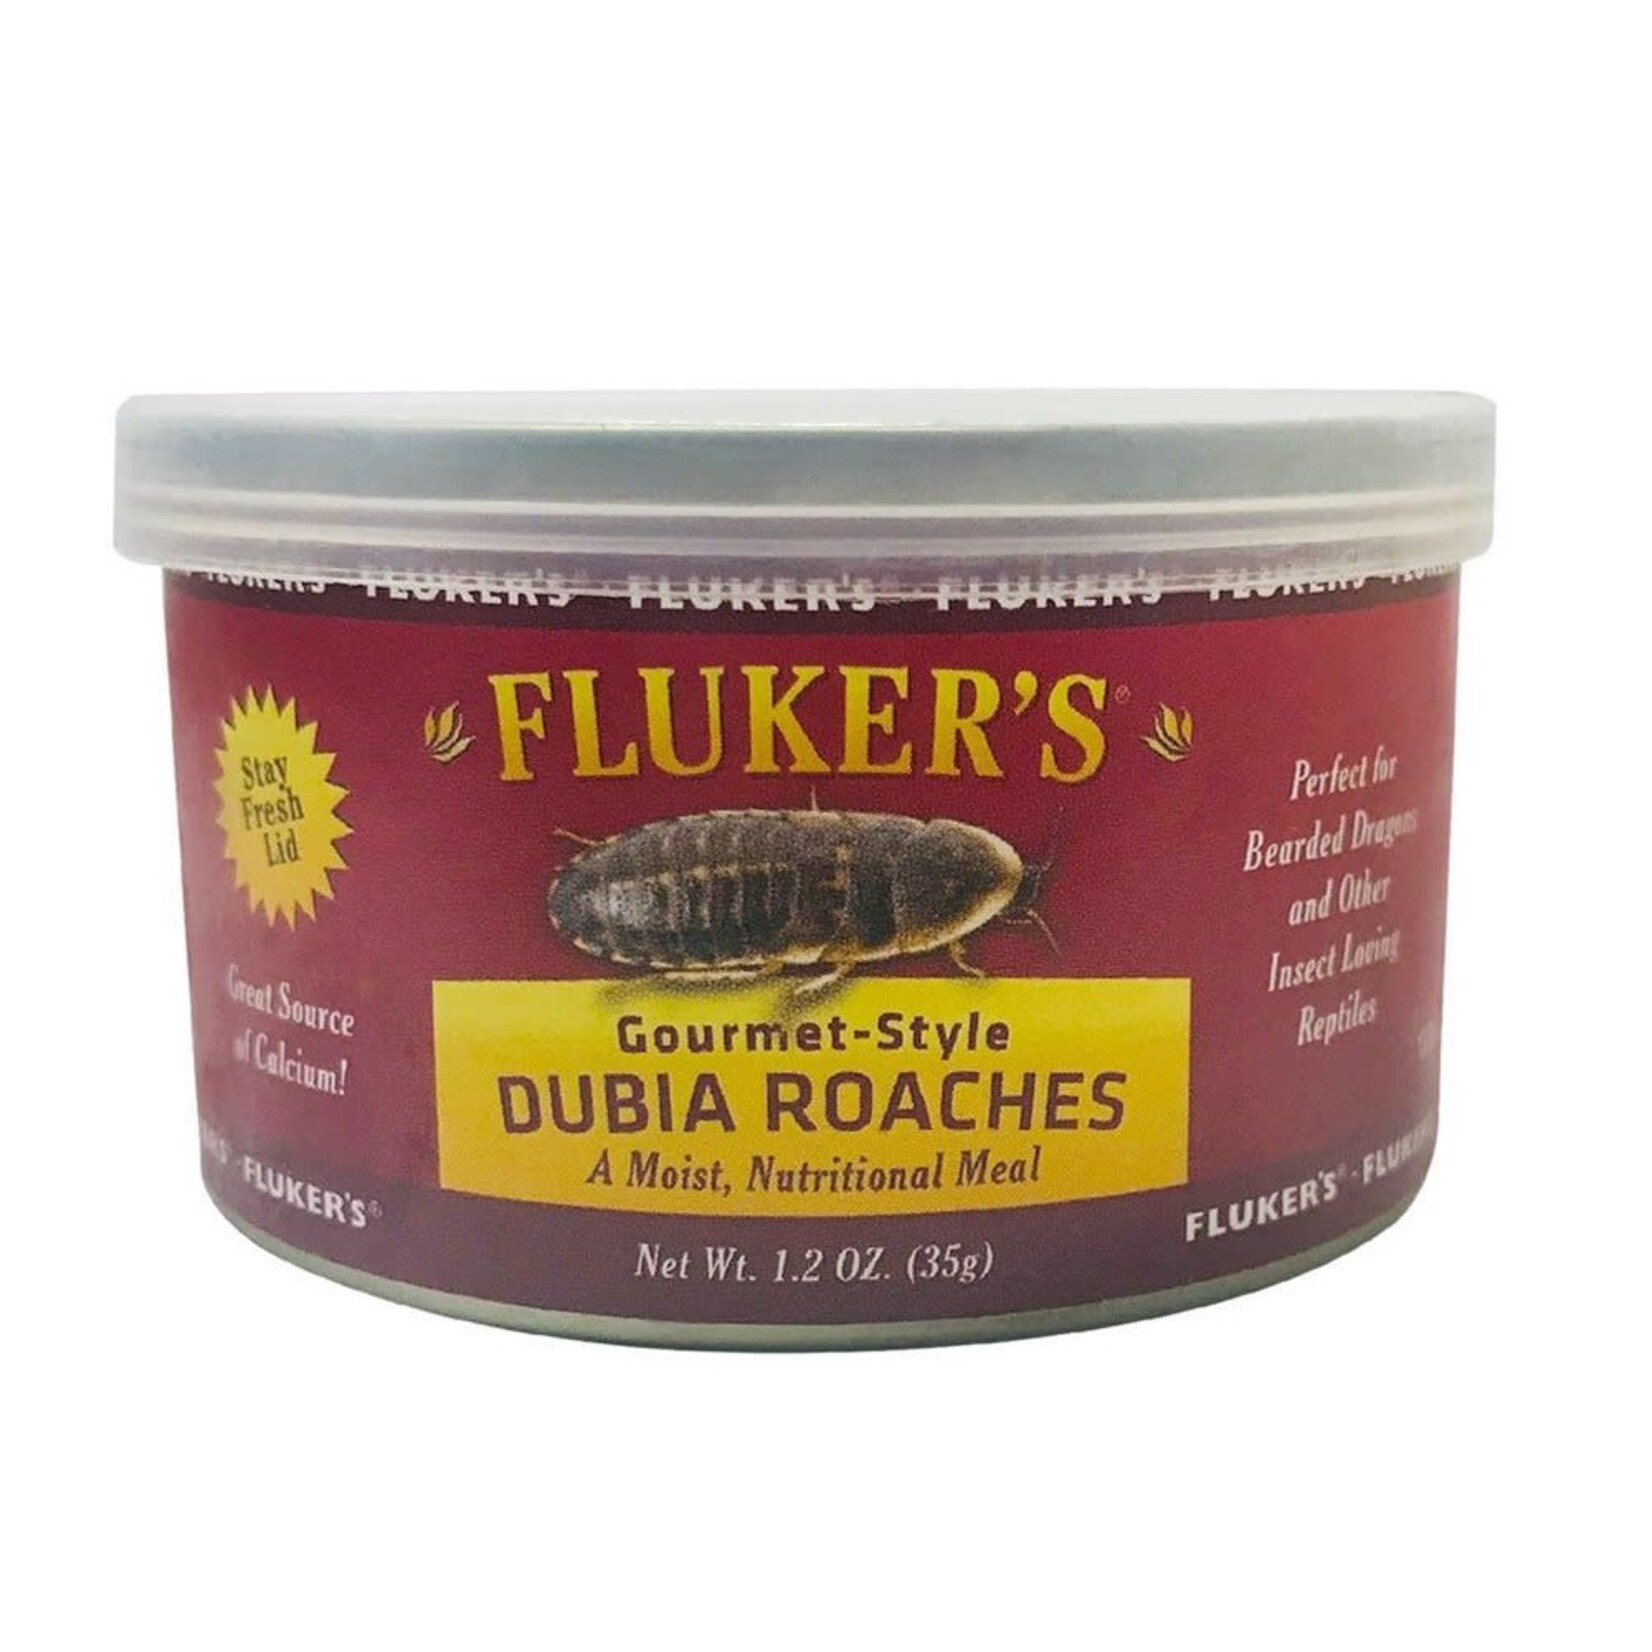 FLUKER'S Gourmet-Style Dubia Roaches - Canned